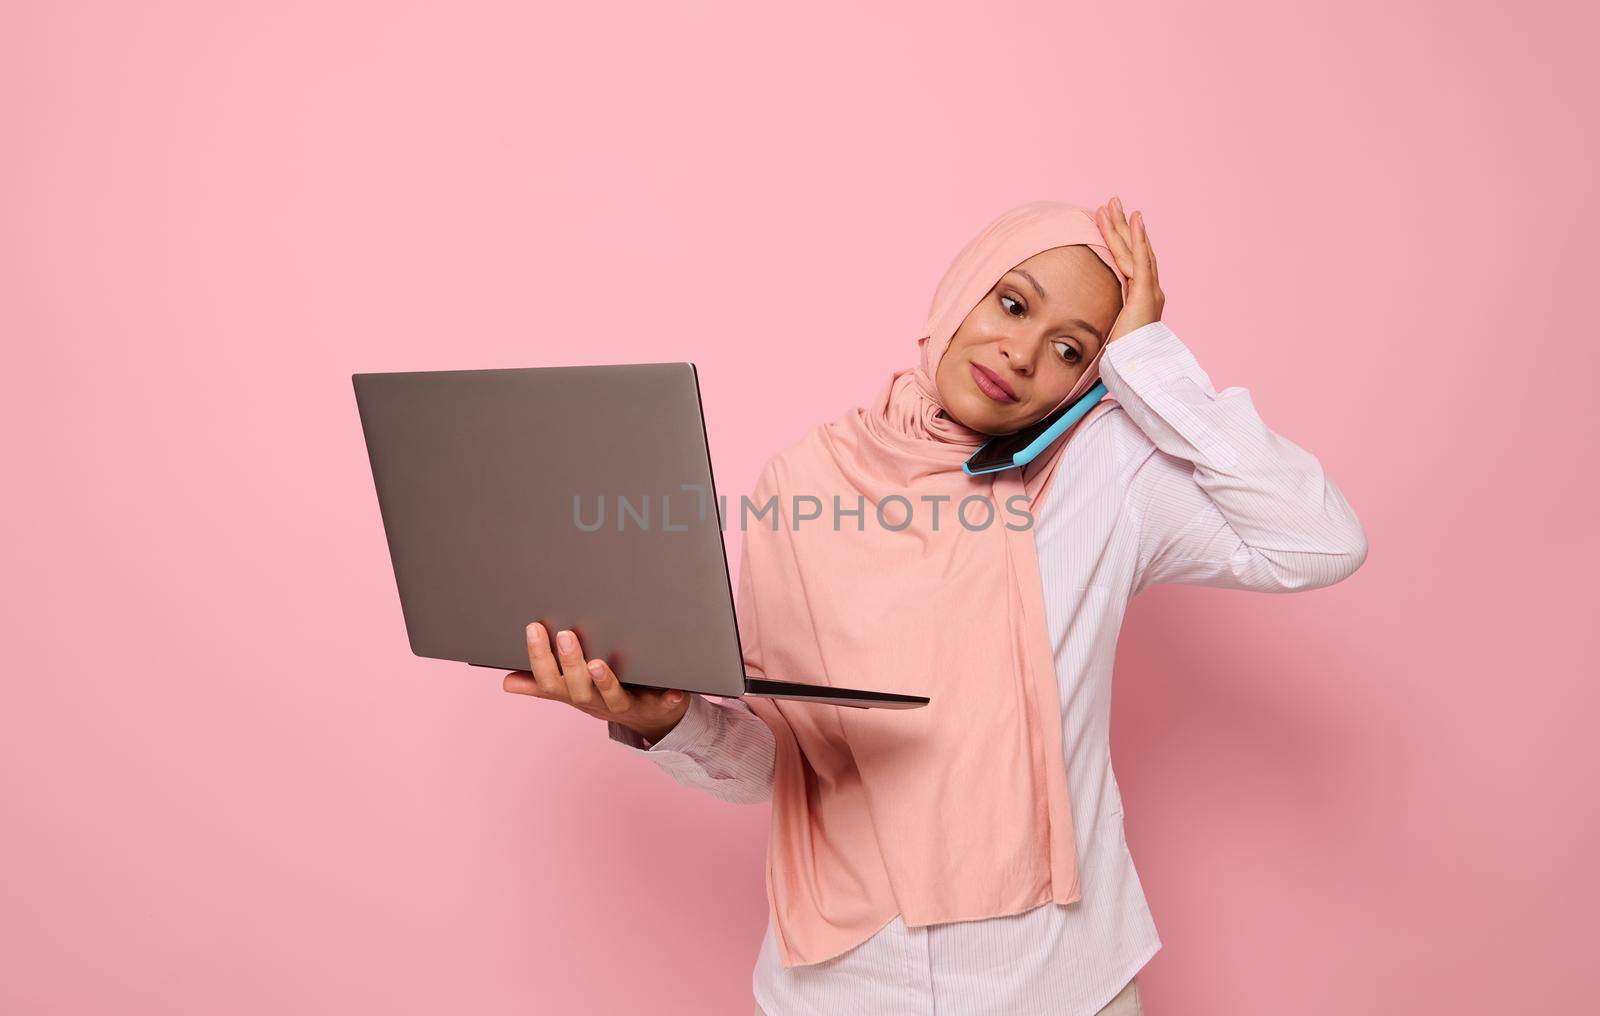 Puzzled Muslim Arab woman in pink hijab, with laptop, talking on the phone, holding her head because of multitasking, looking down with sad expression, on colored background with copy space by artgf